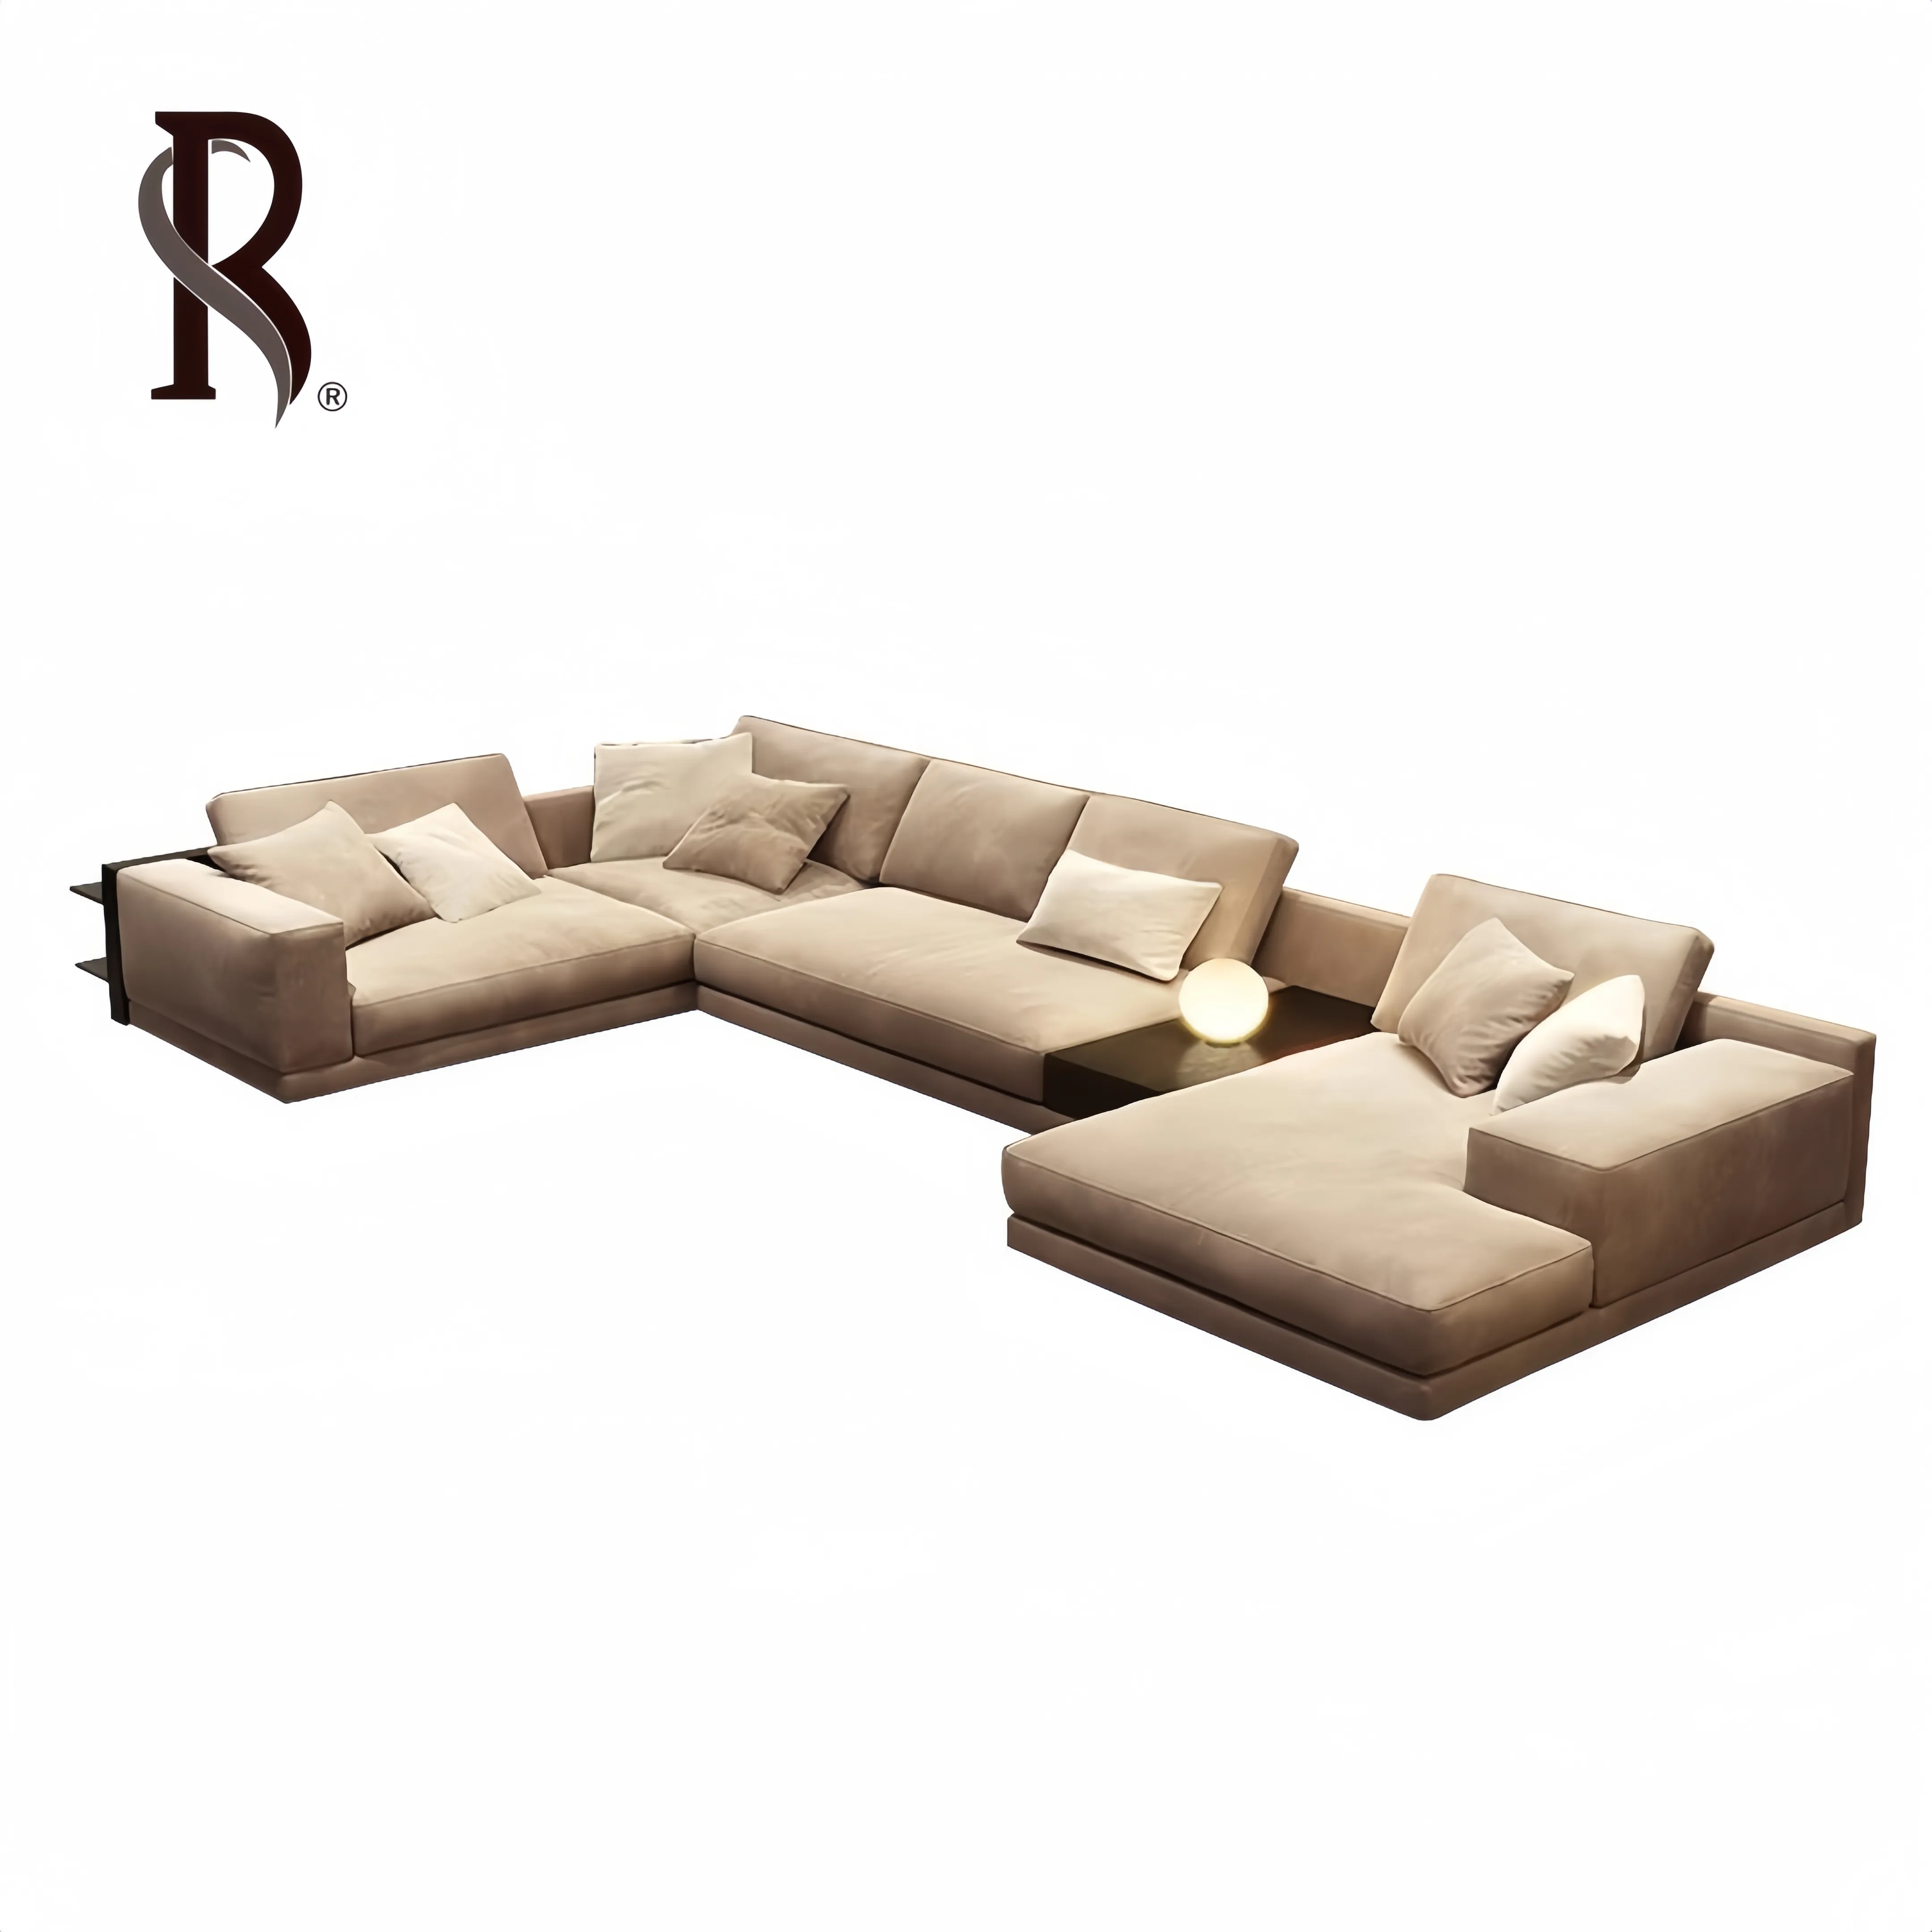 Rising Foshan Manufacturer L shaped sofa set Genuine Leather Sofa With Competitive Price